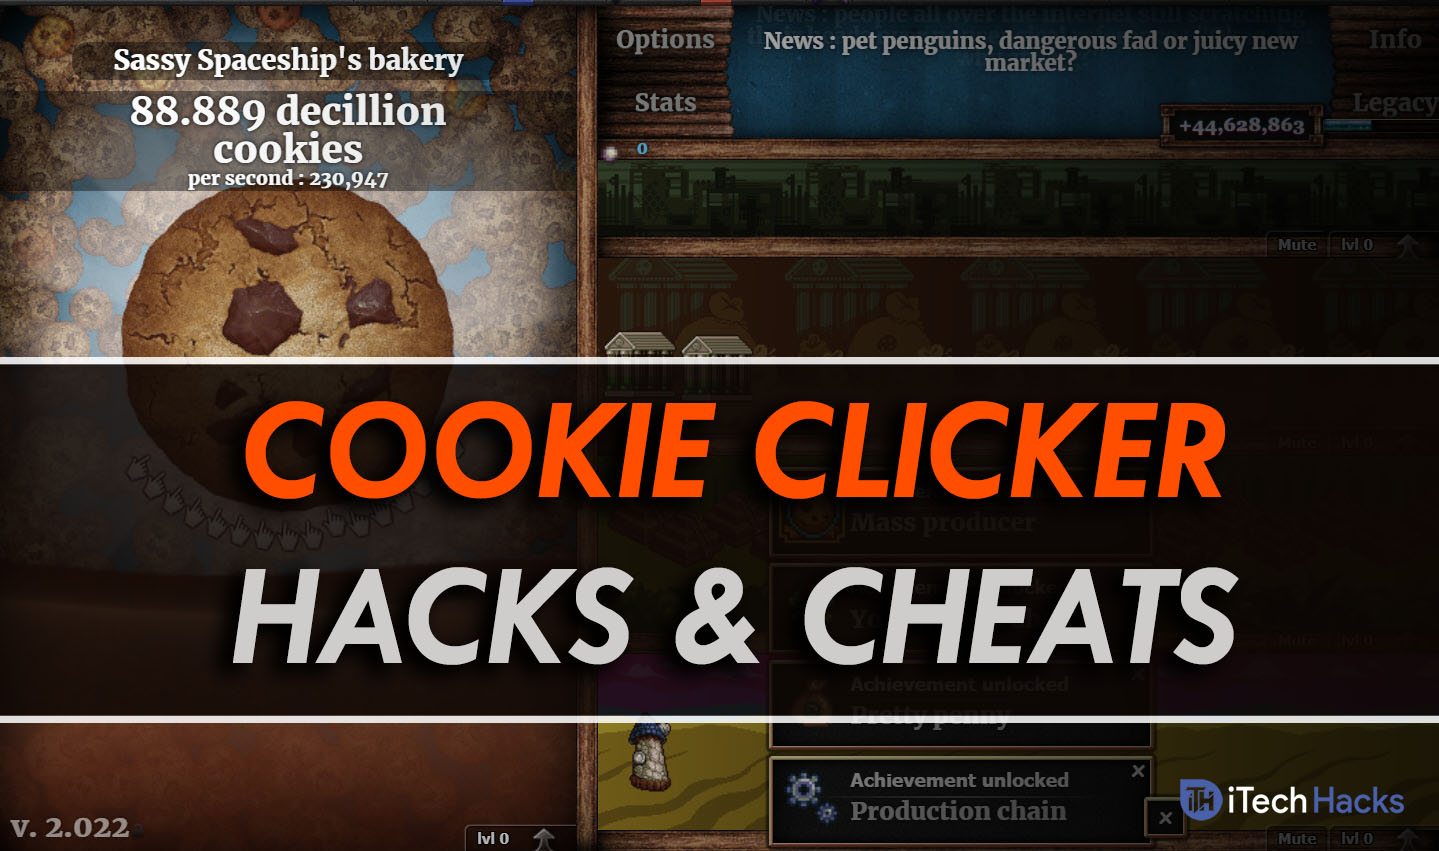 Cookie Clicker Cheats and Hacks 2020